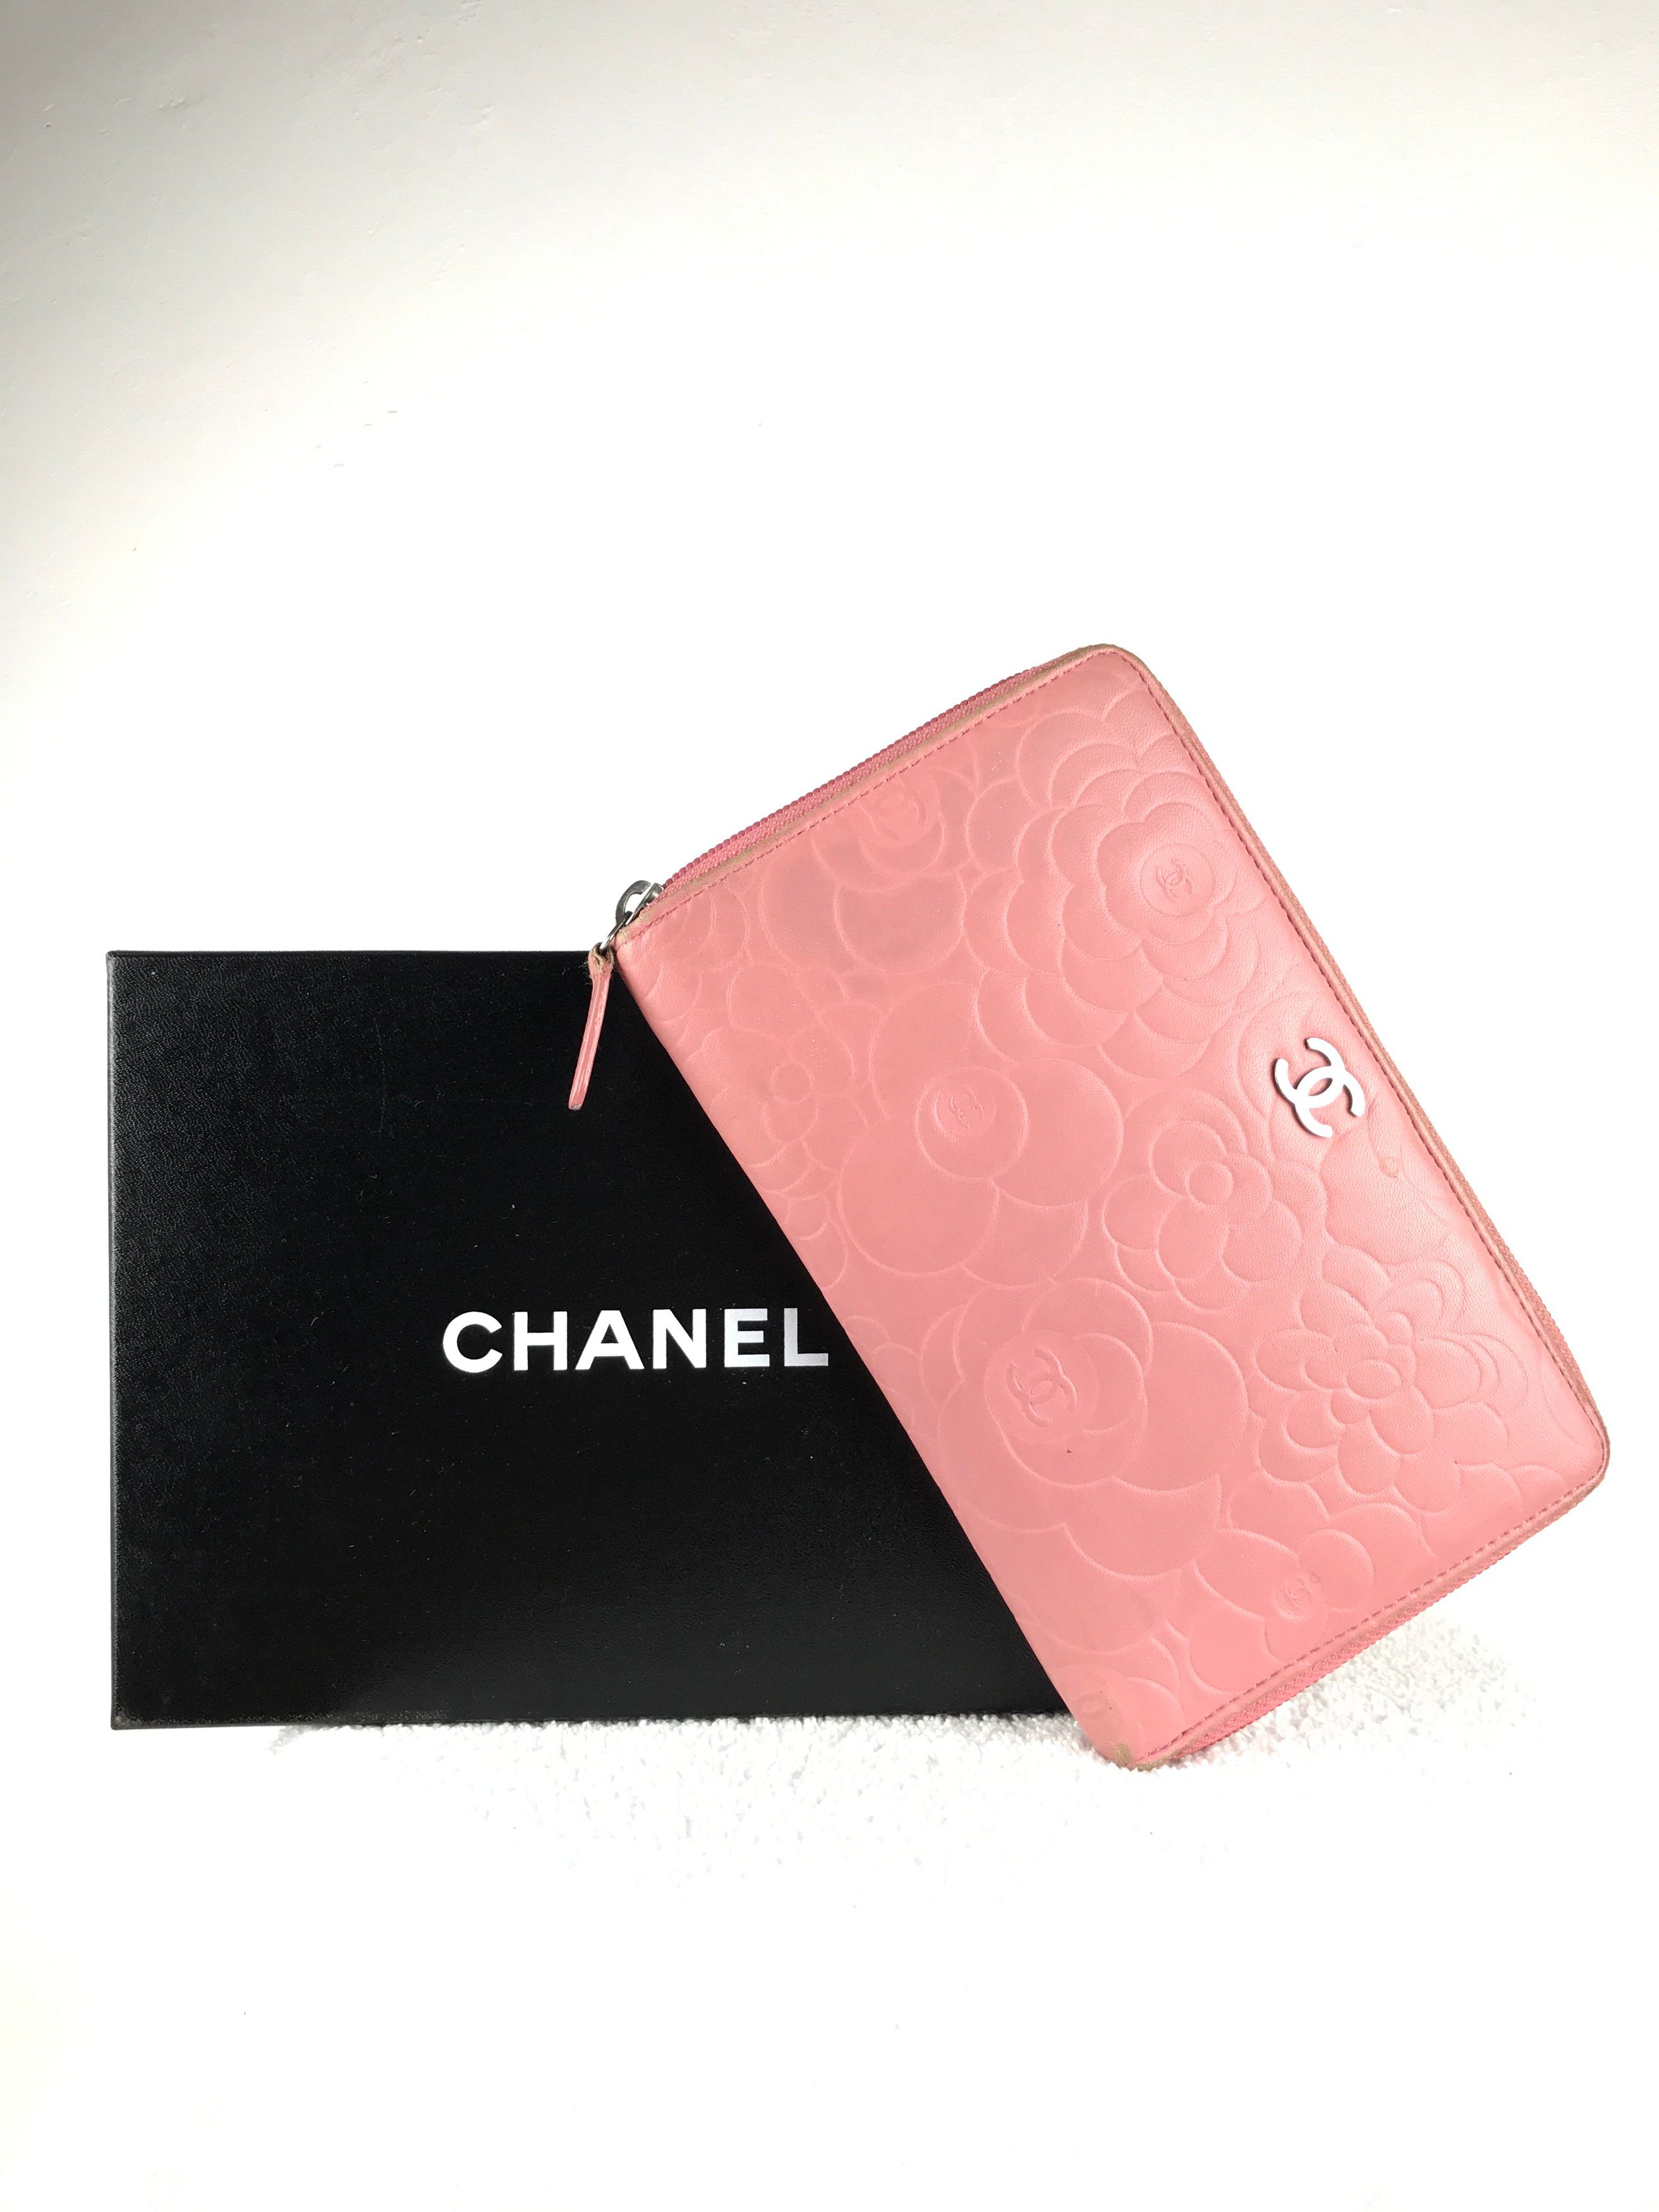 Vintage Chanel Pink Embossed Camellia Wallet Zip Around With Box | Grailed